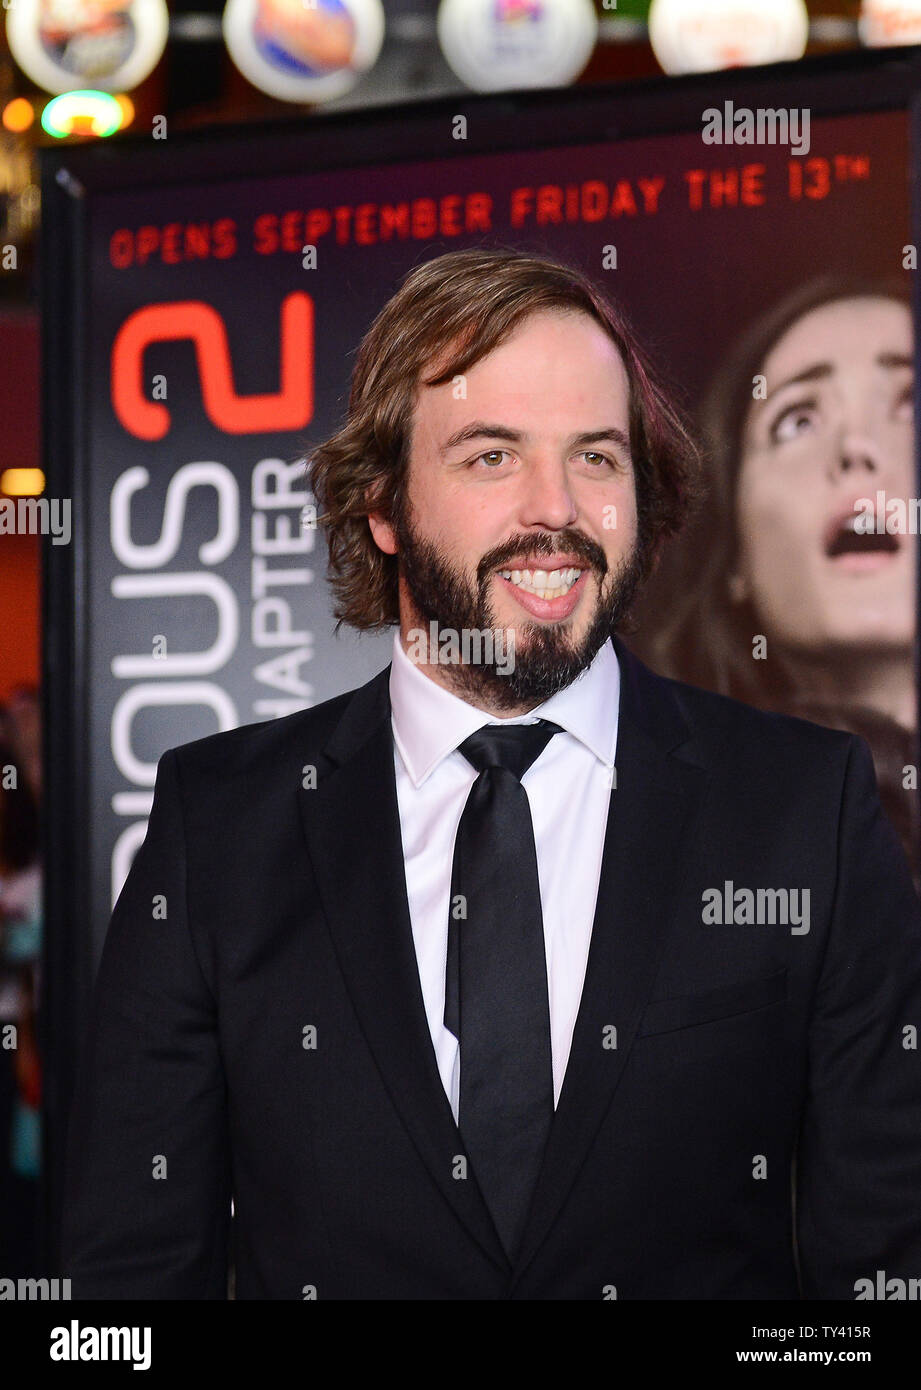 Angus Sampson attends the premiere of the motion picture horror thriller 'Insidious: Chapter 2' at Universal CityWalk in Universal City on September 10, 2013. The haunted Lambert family seeks to uncover the mysterious childhood secret that has left them dangerously connected to the spirit world.  UPI/Jim Ruymen Stock Photo